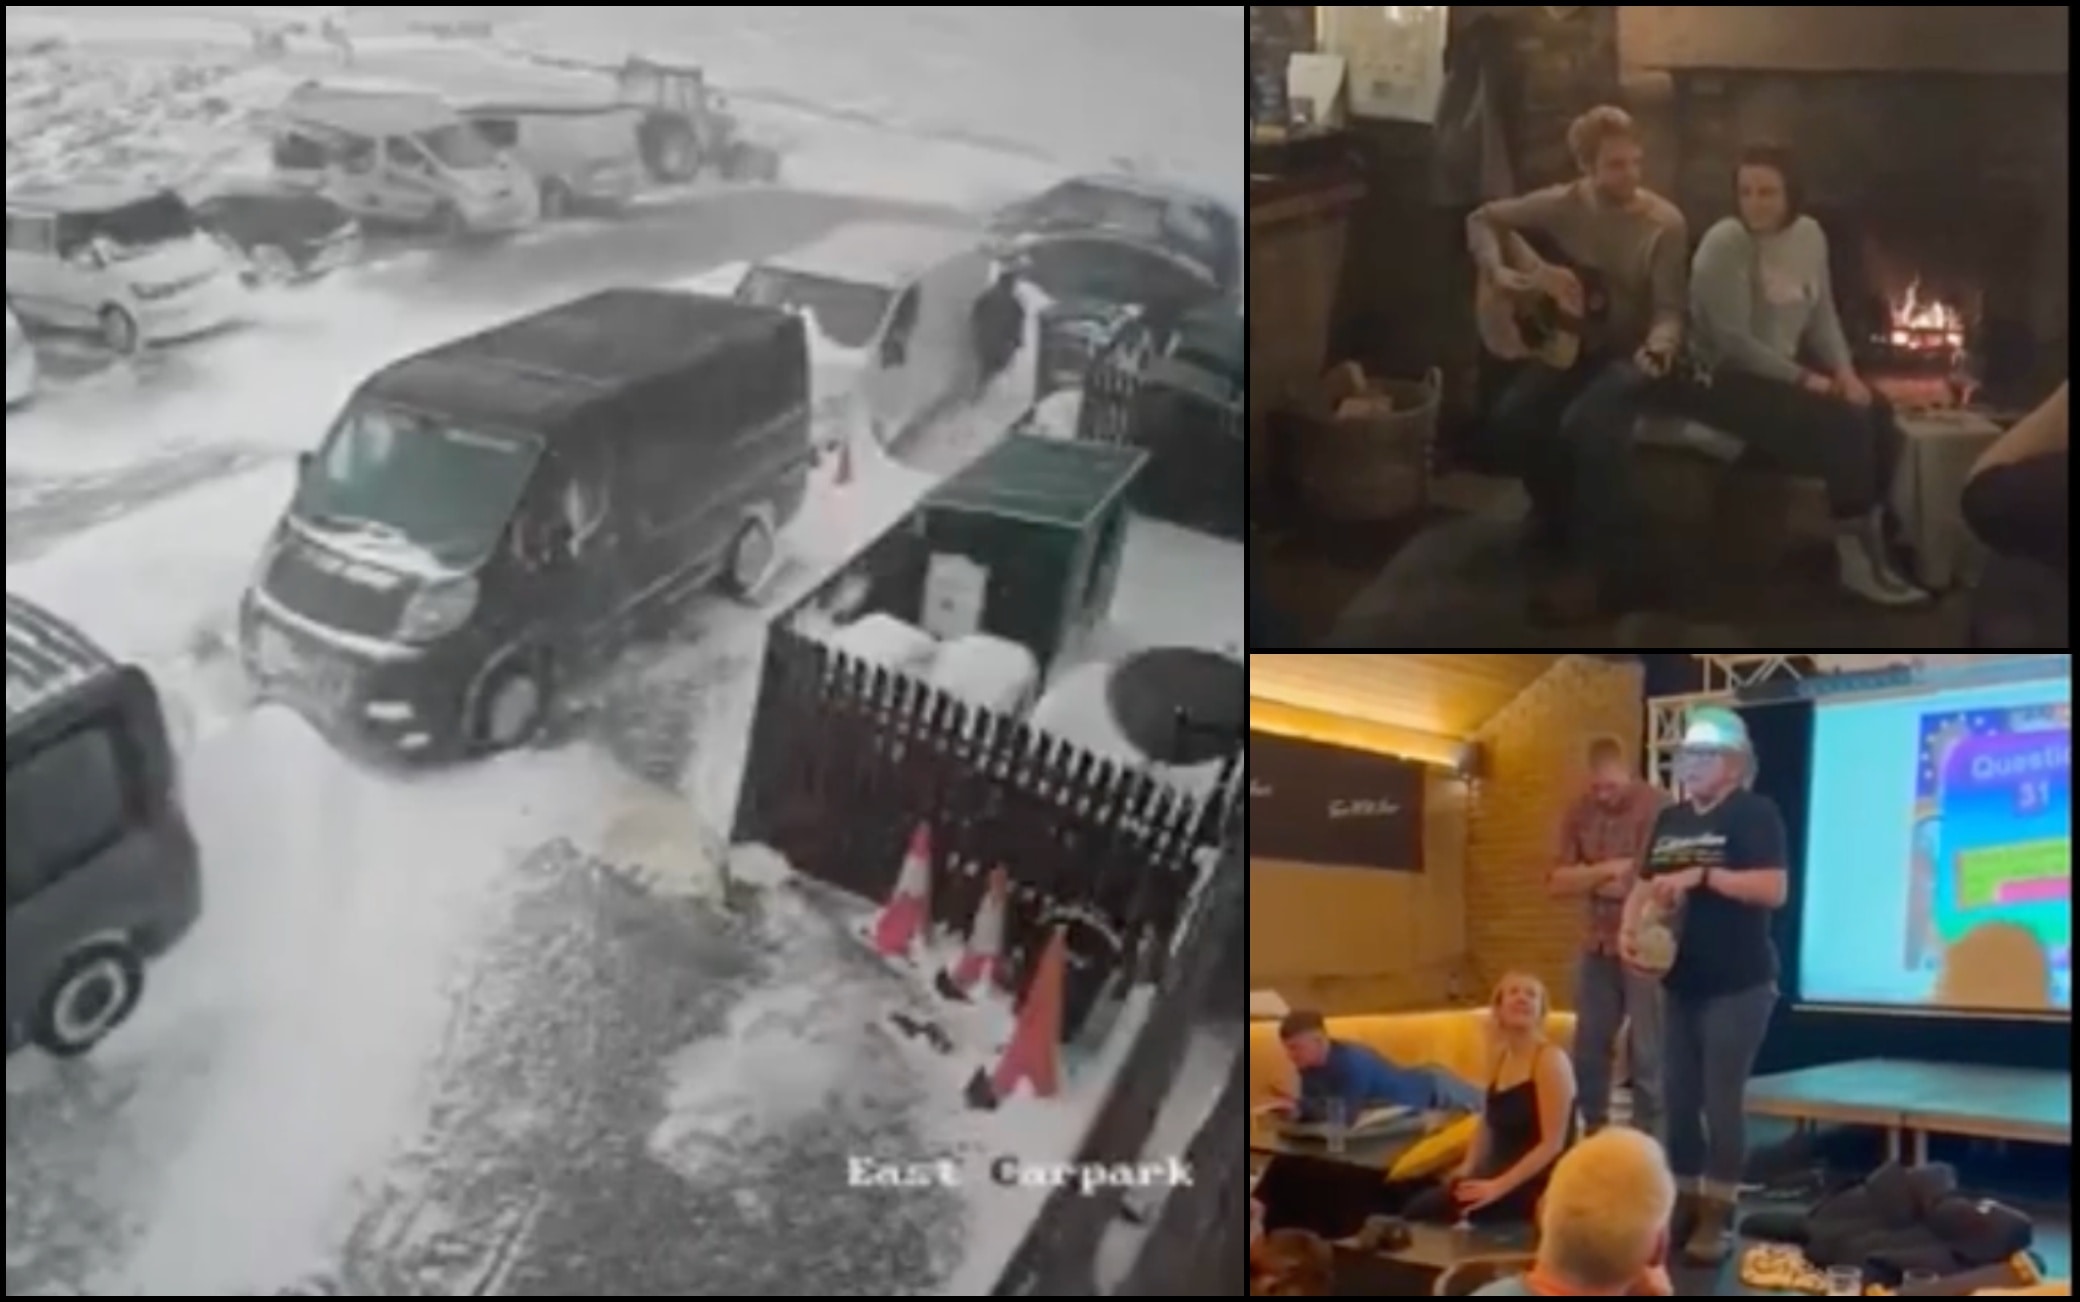 UK, 61 people stranded for two days at the Tan Hill Inn pub due to a snow storm.  VIDEO